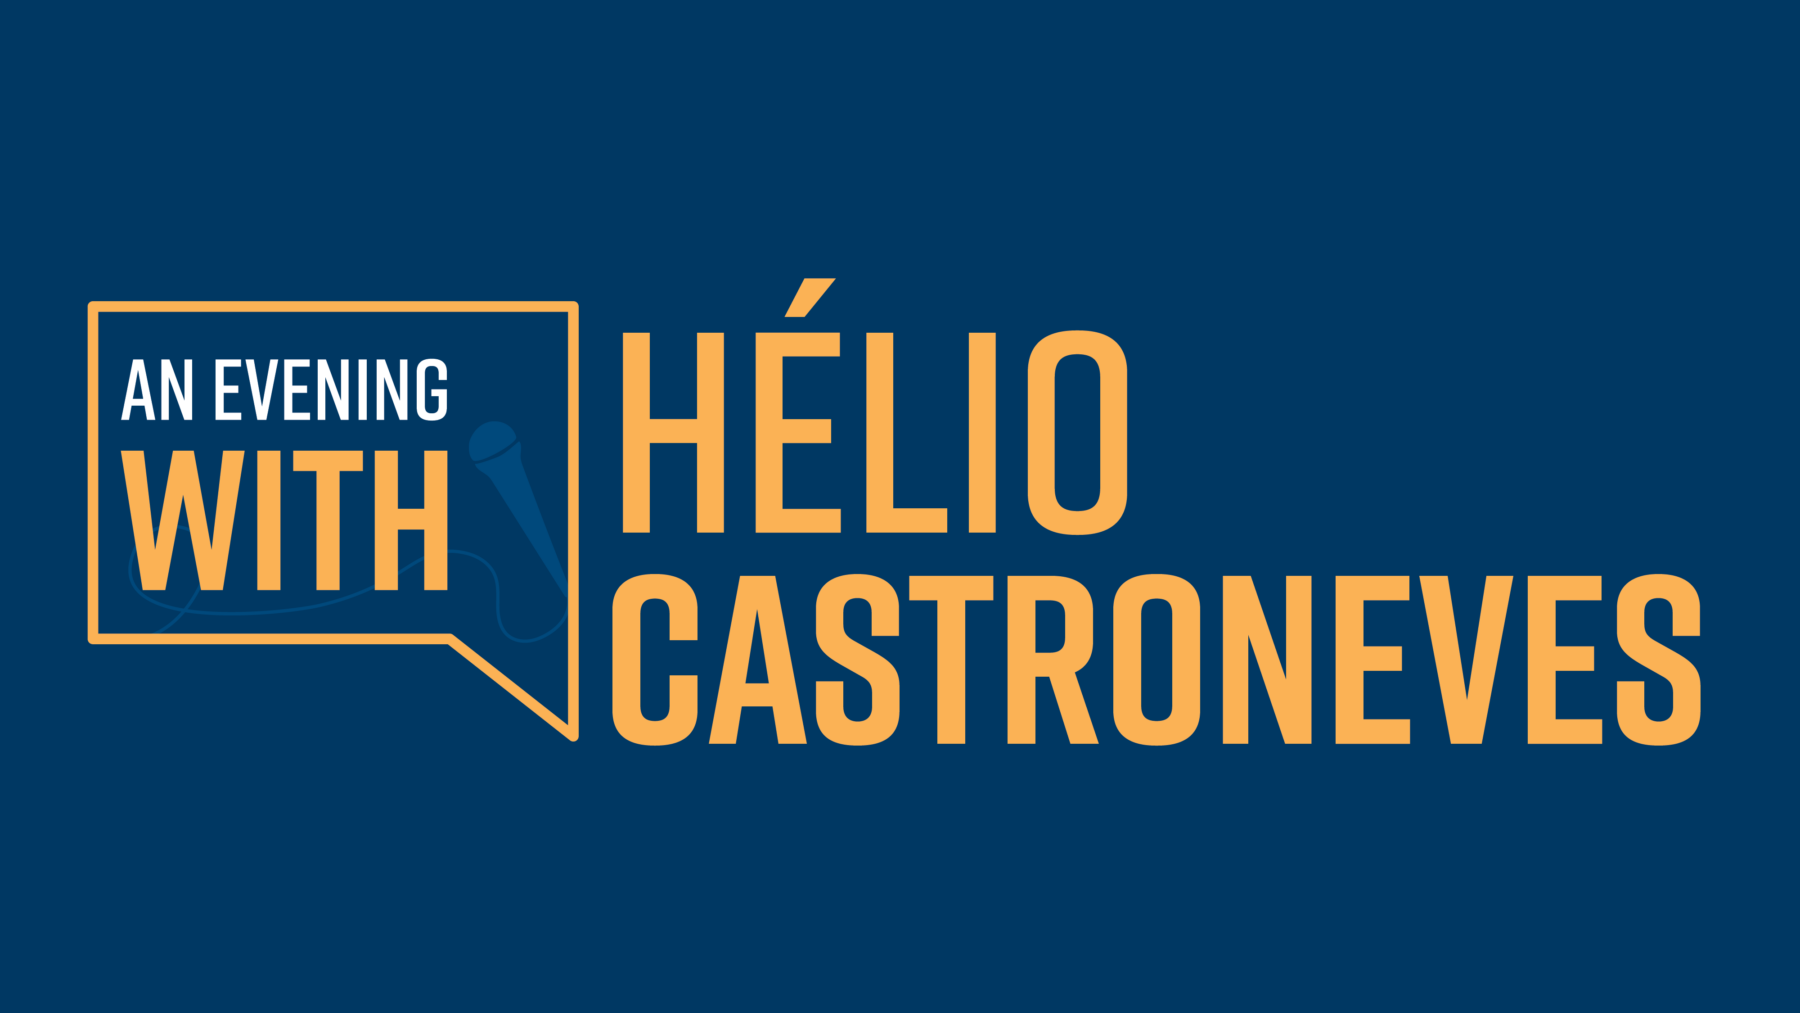 An Evening with Helio Castroneves